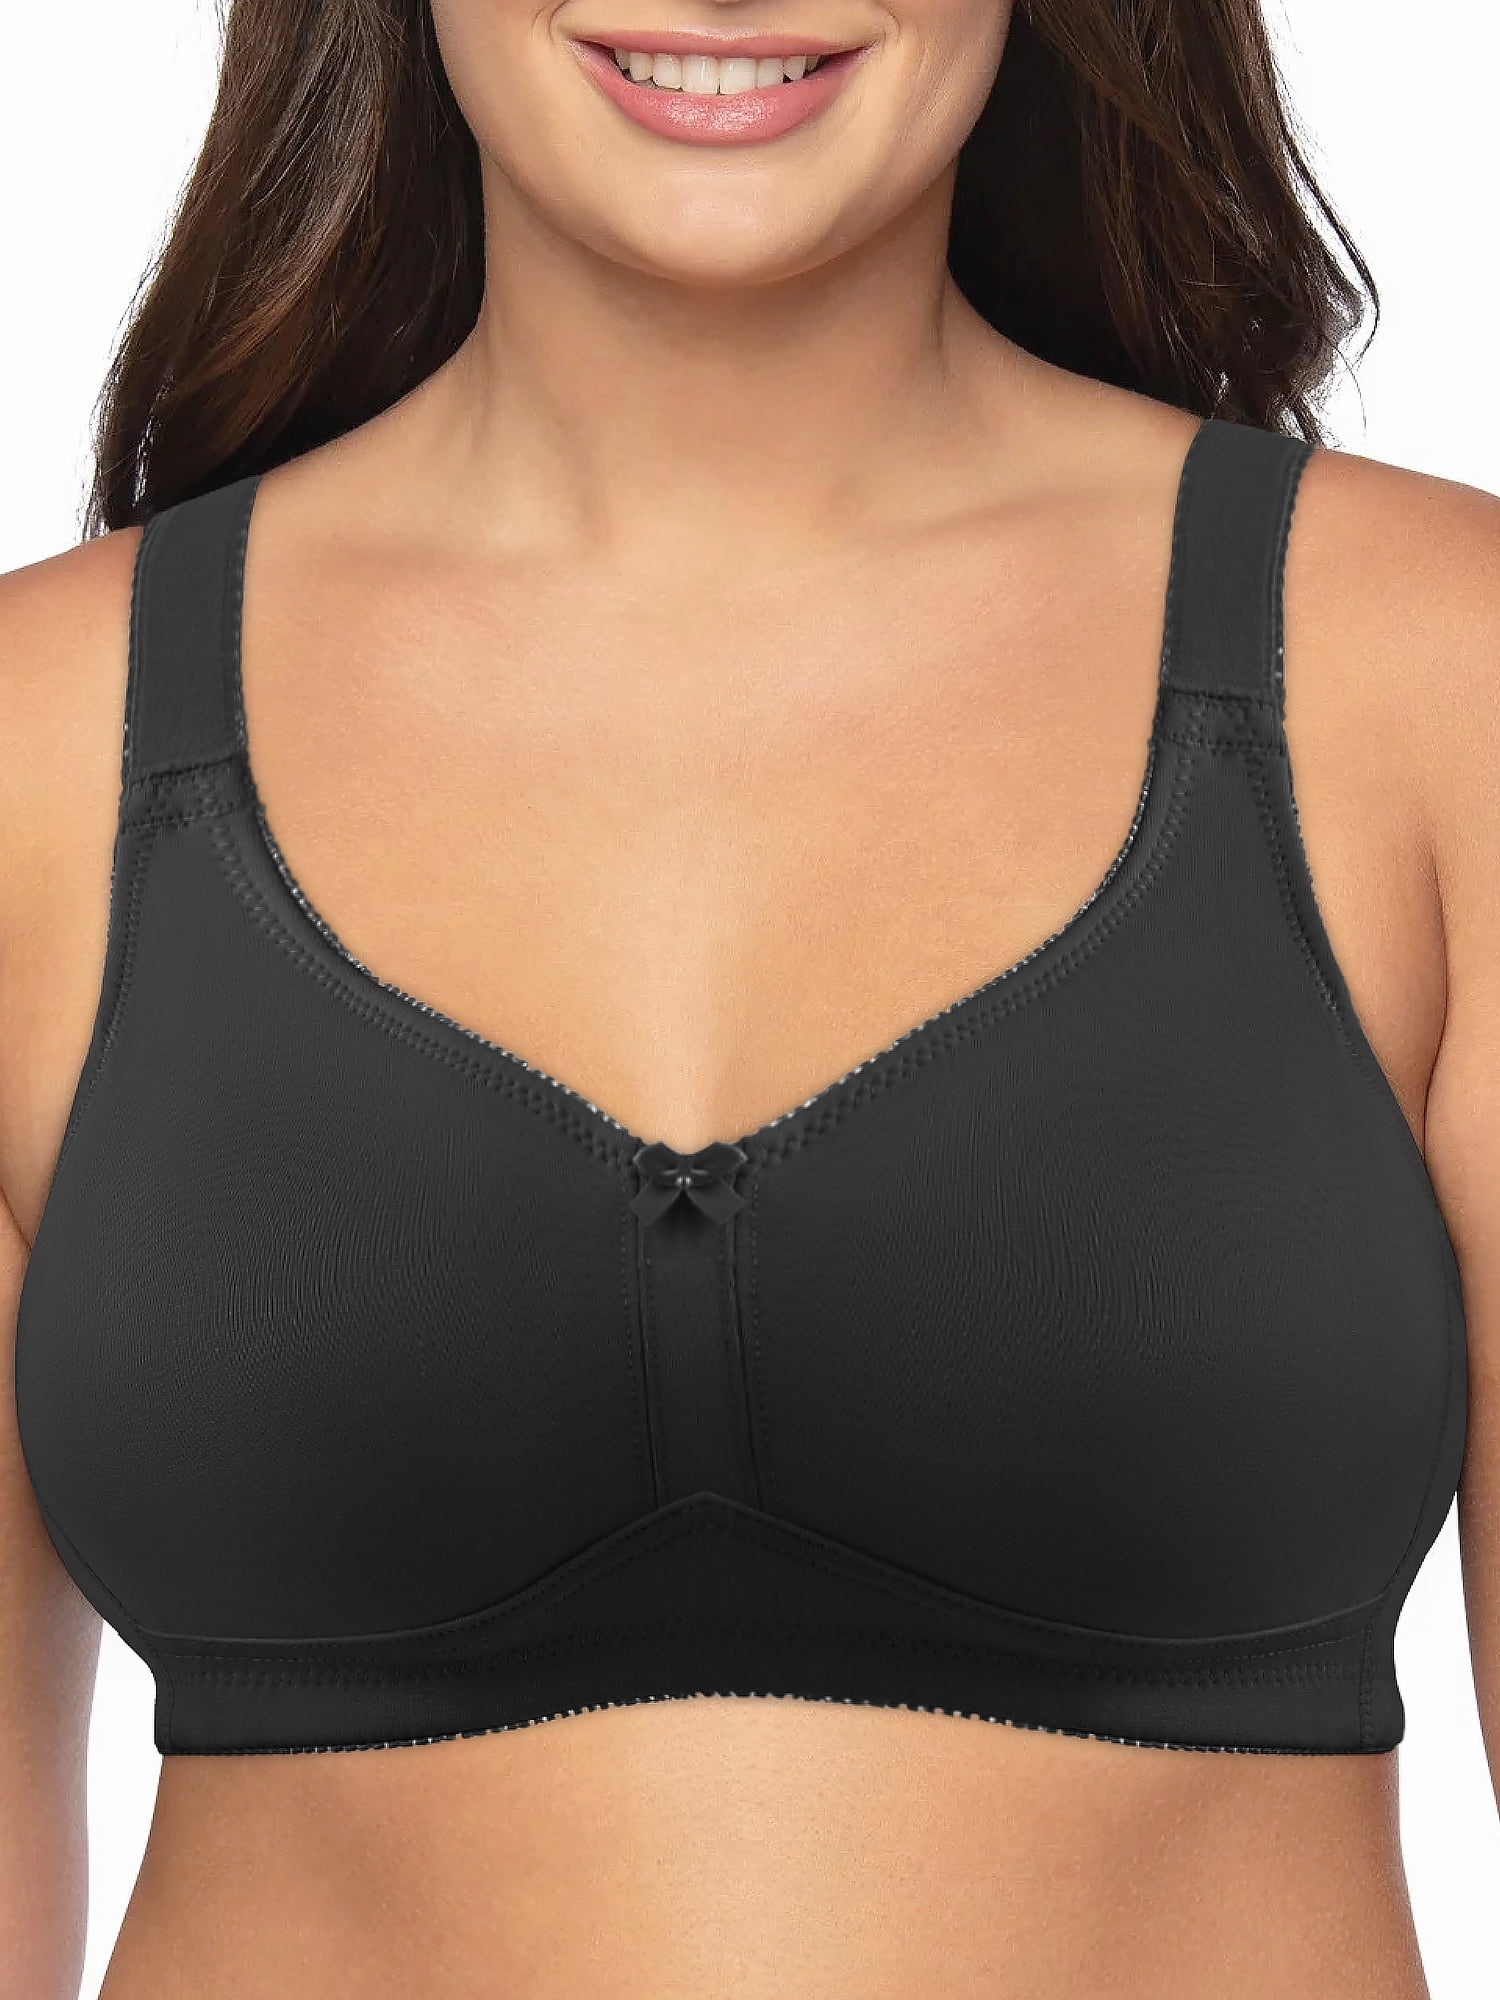 2 Pieces Women's Bra Compression High Support Bra For Women's